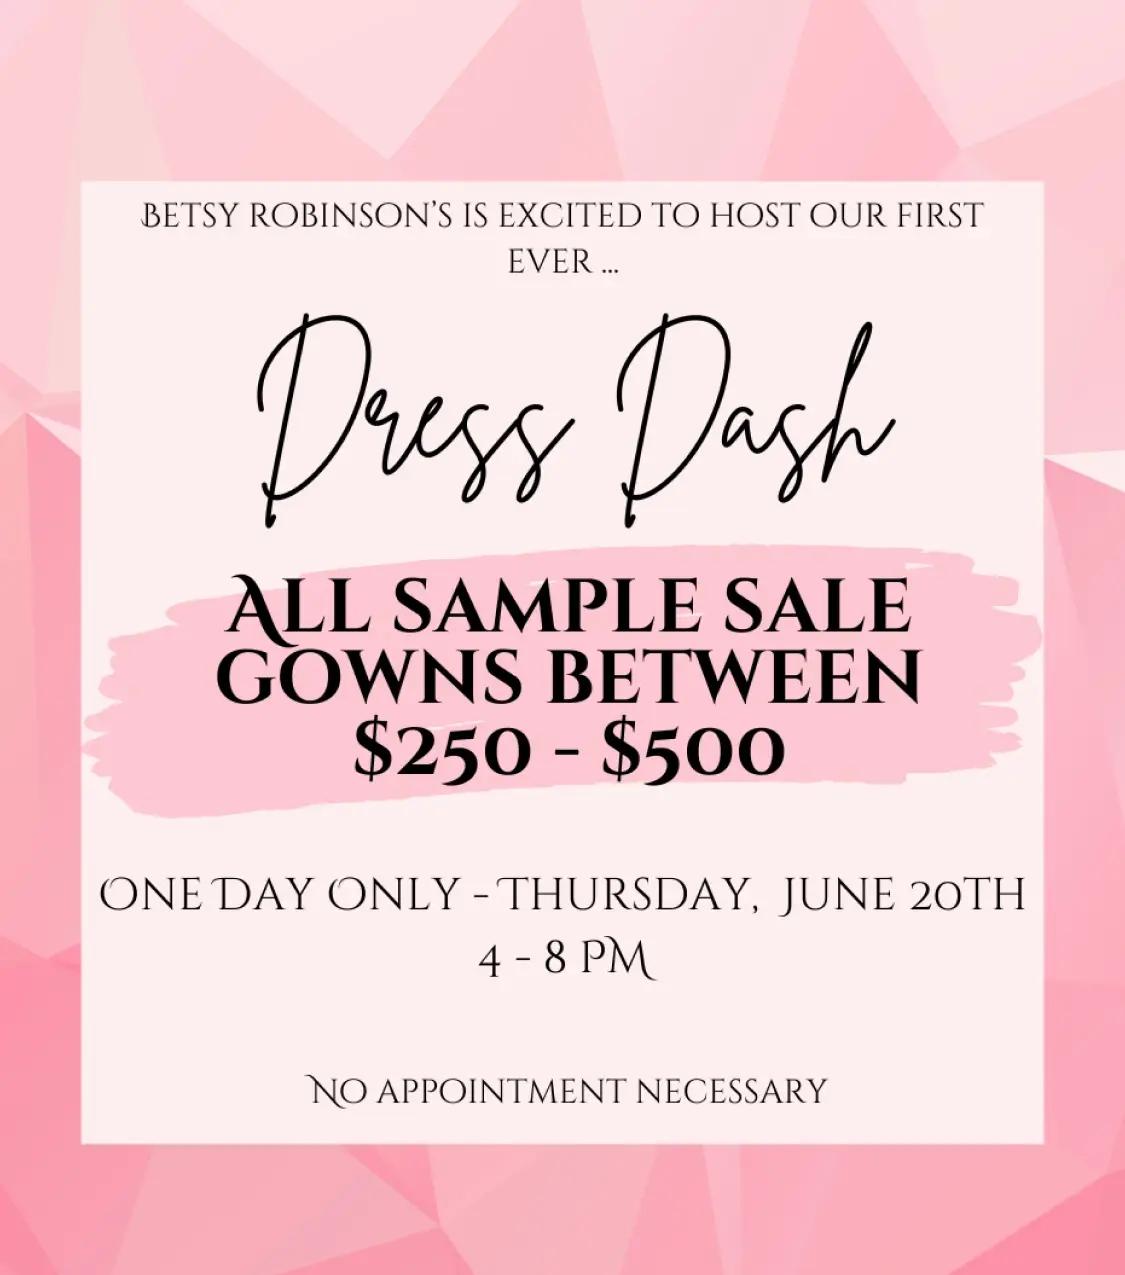 Dress Dash, all sample sale bridal gowns between 250-500